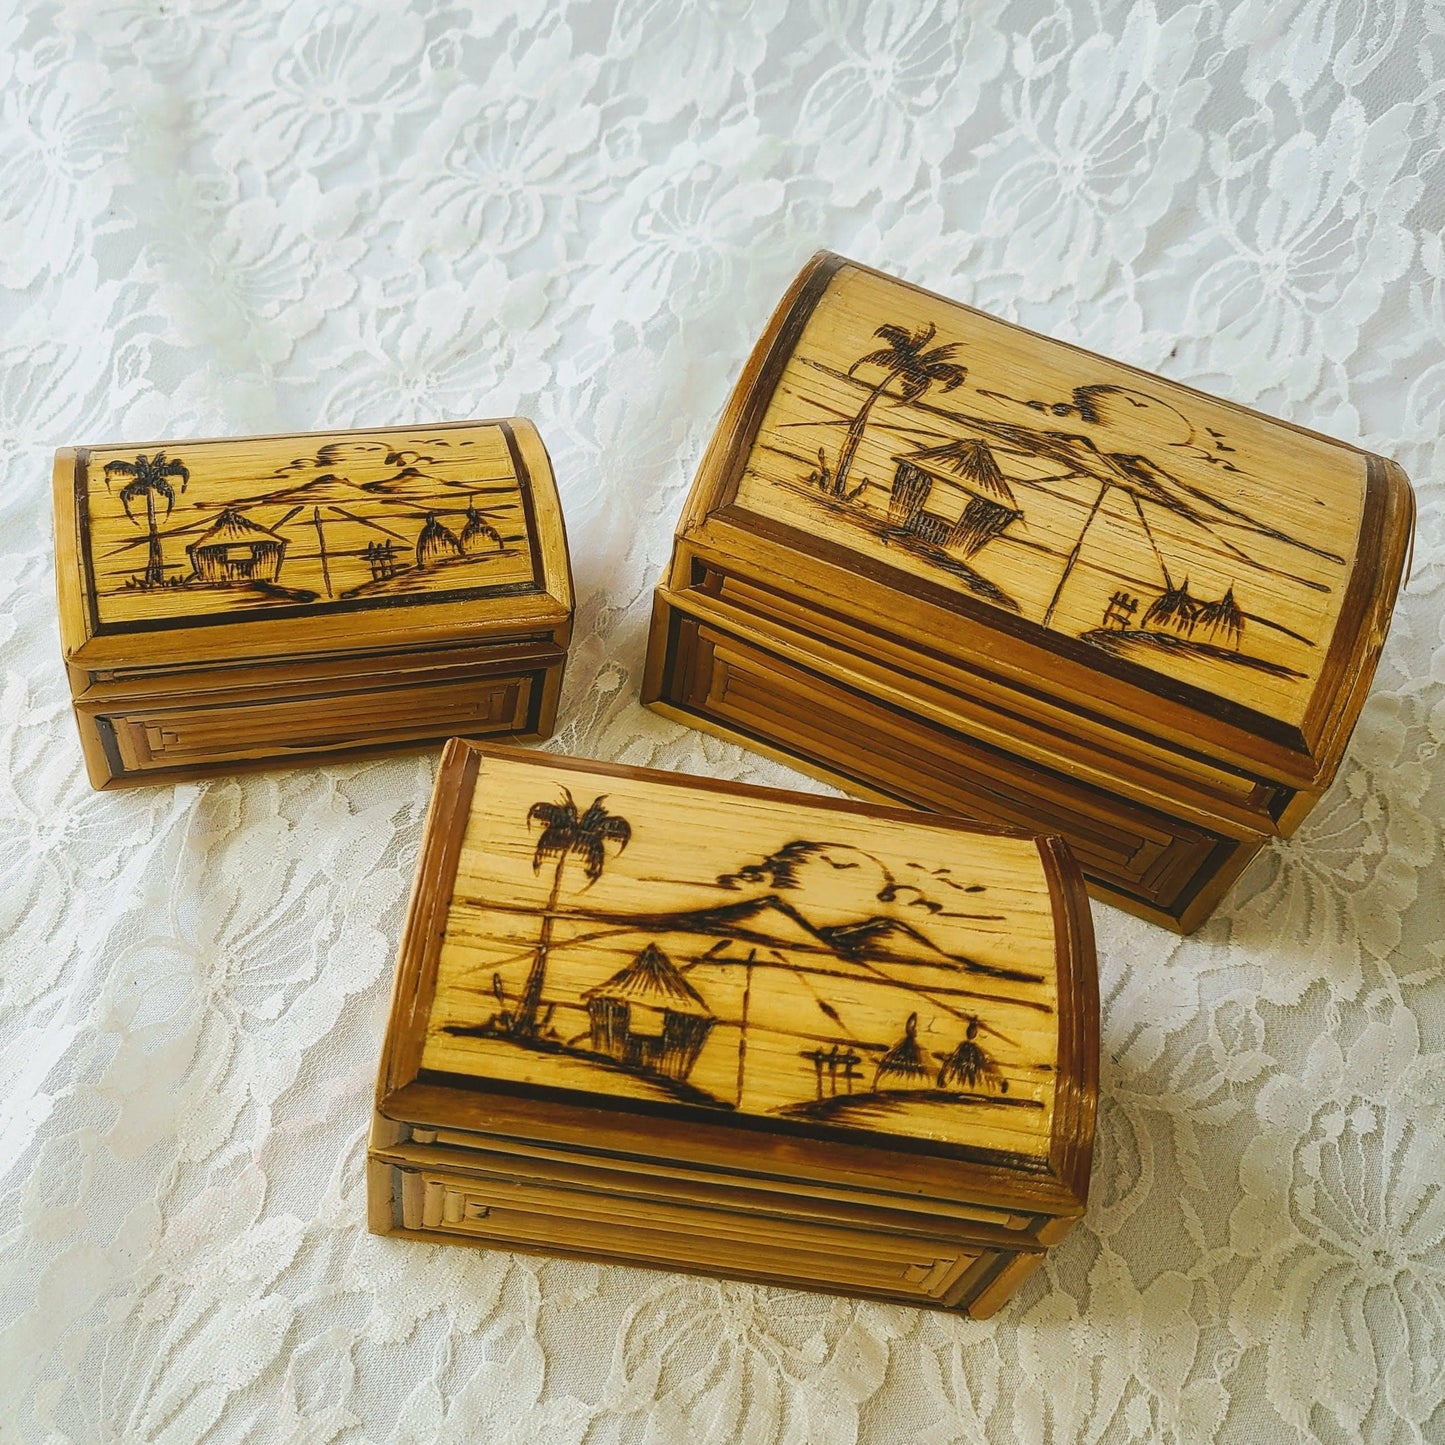 This is a set of 3 boxes that nest inside of one another.  Vintage Hand Painted Indonesian Nesting Bamboo Boxes ~ Intricate Wood Burning Design Featuring an Indonesian Island Fishing Village with Grass Huts, Palm Trees, Fish Racks, Seagulls, and a Beautiful Island Sunset~ Red Velvet Inside